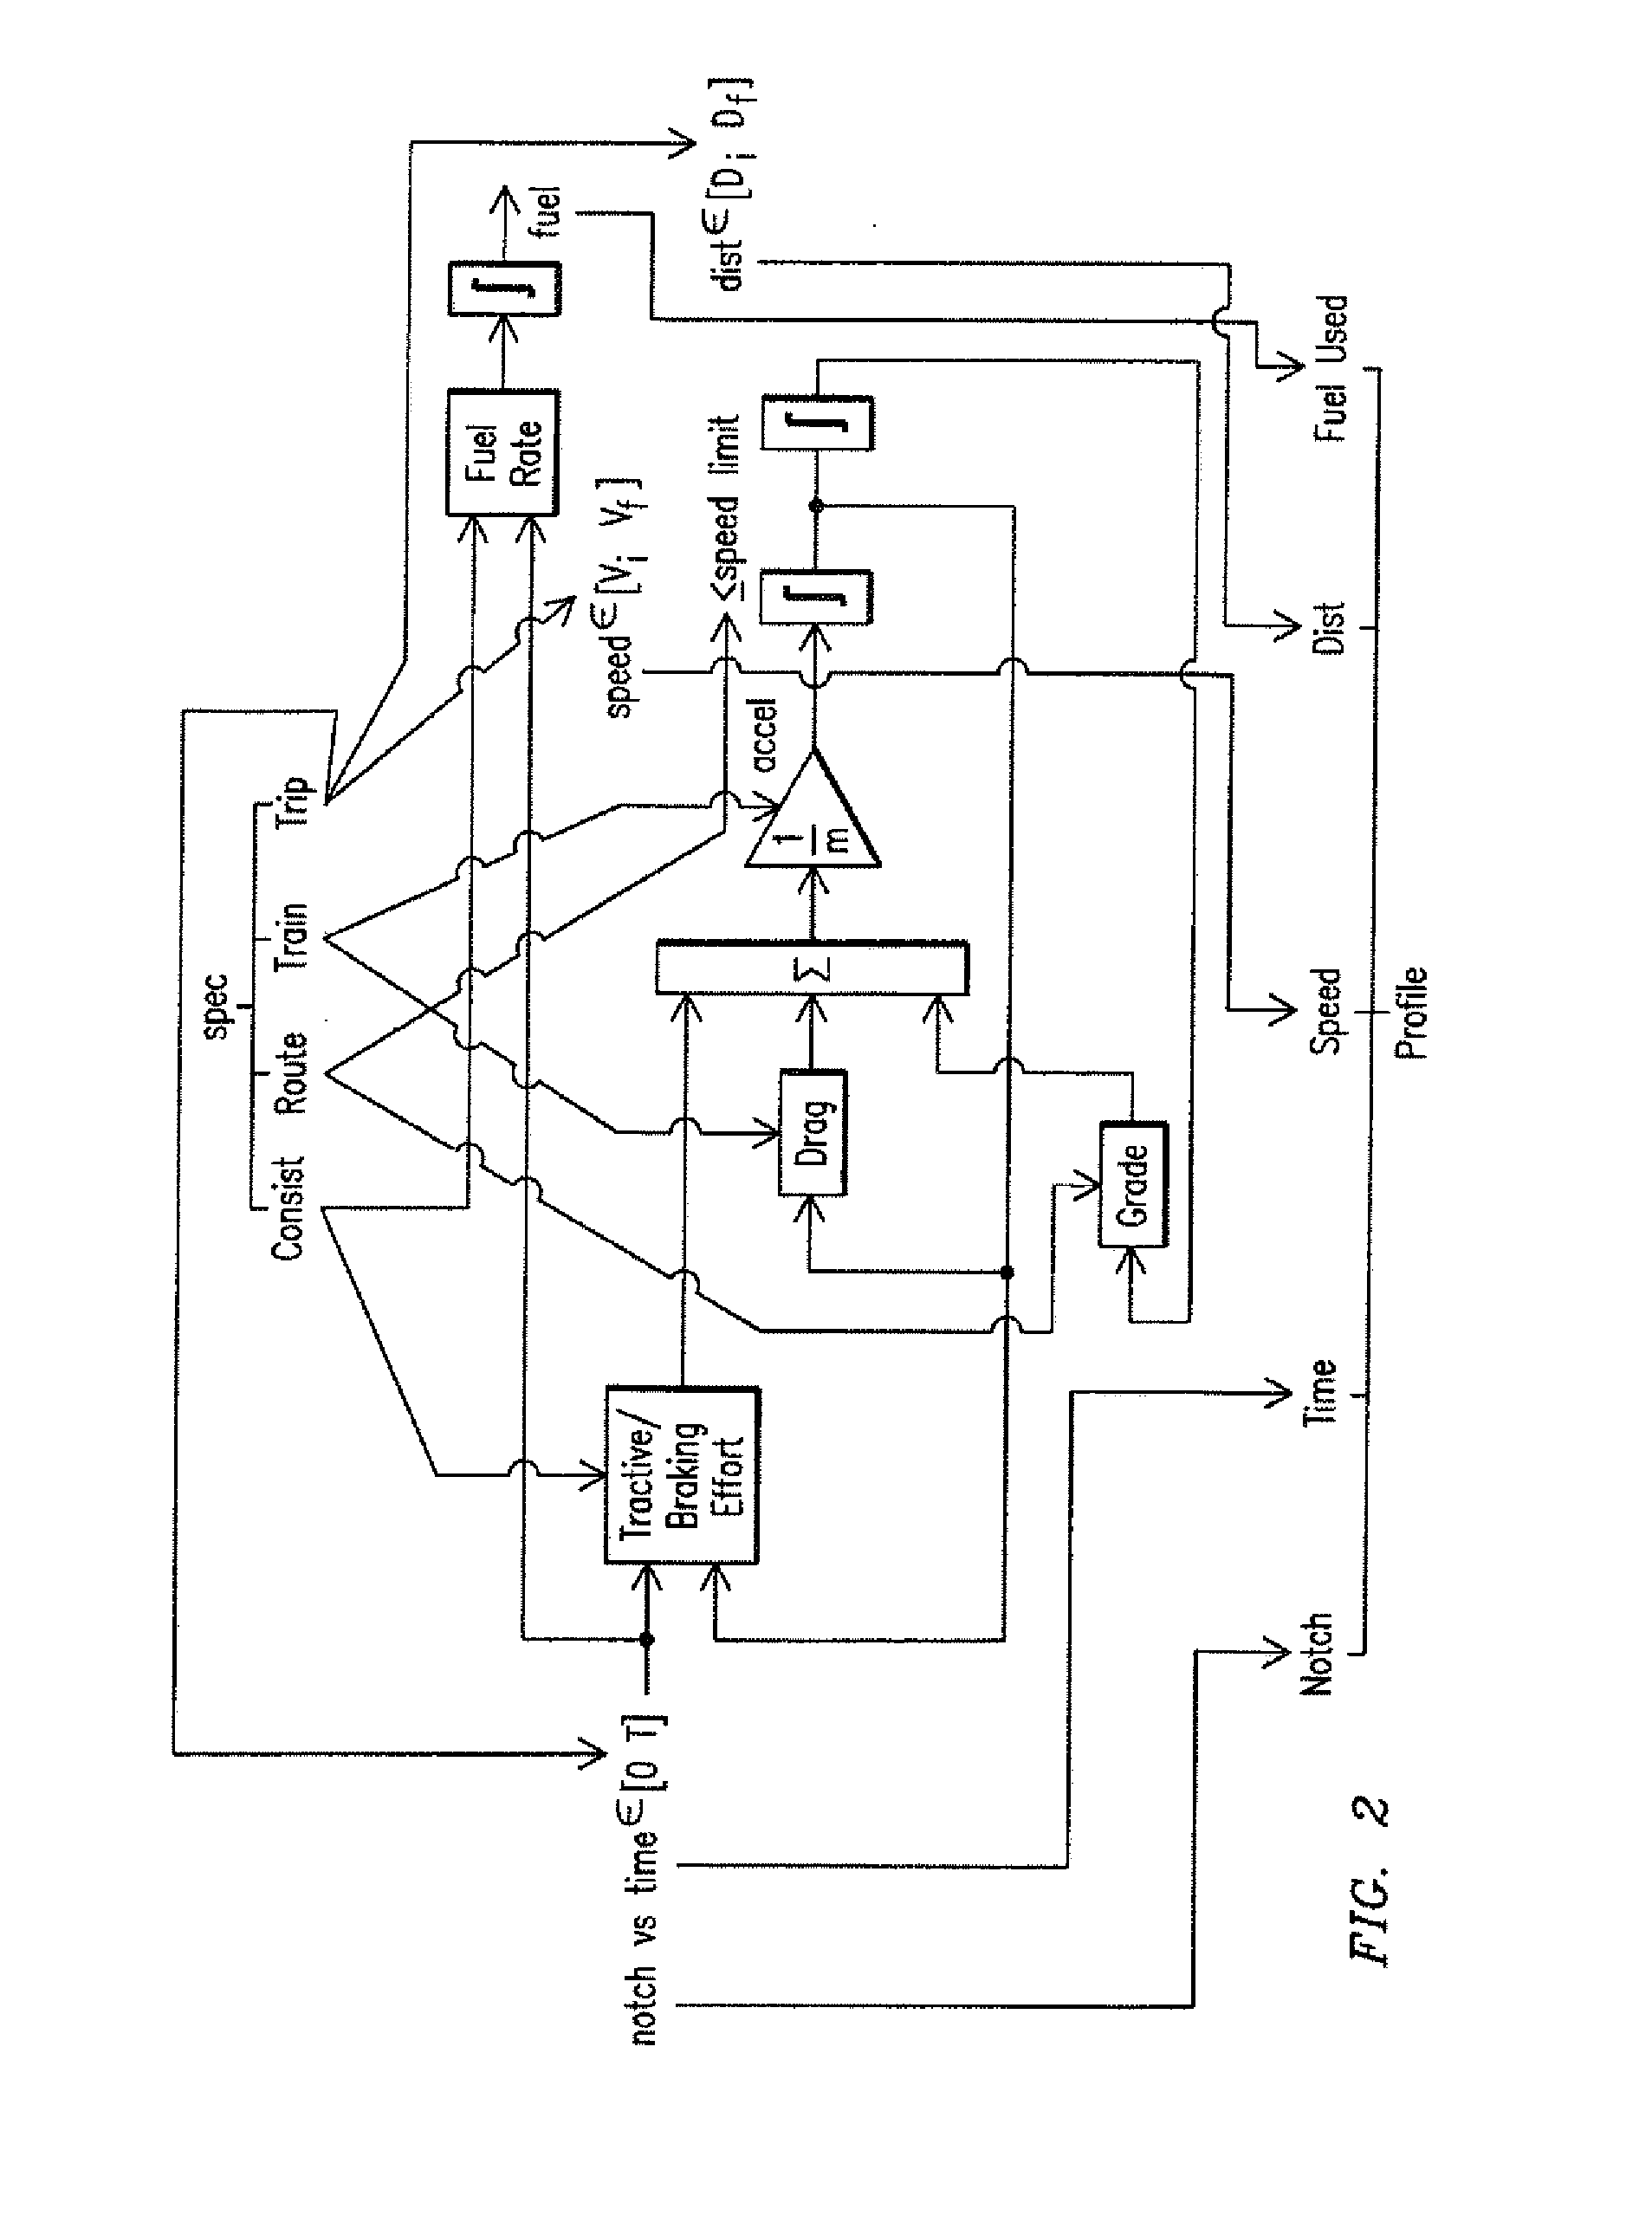 Control system and method for remotely isolating powered units in a vehicle system